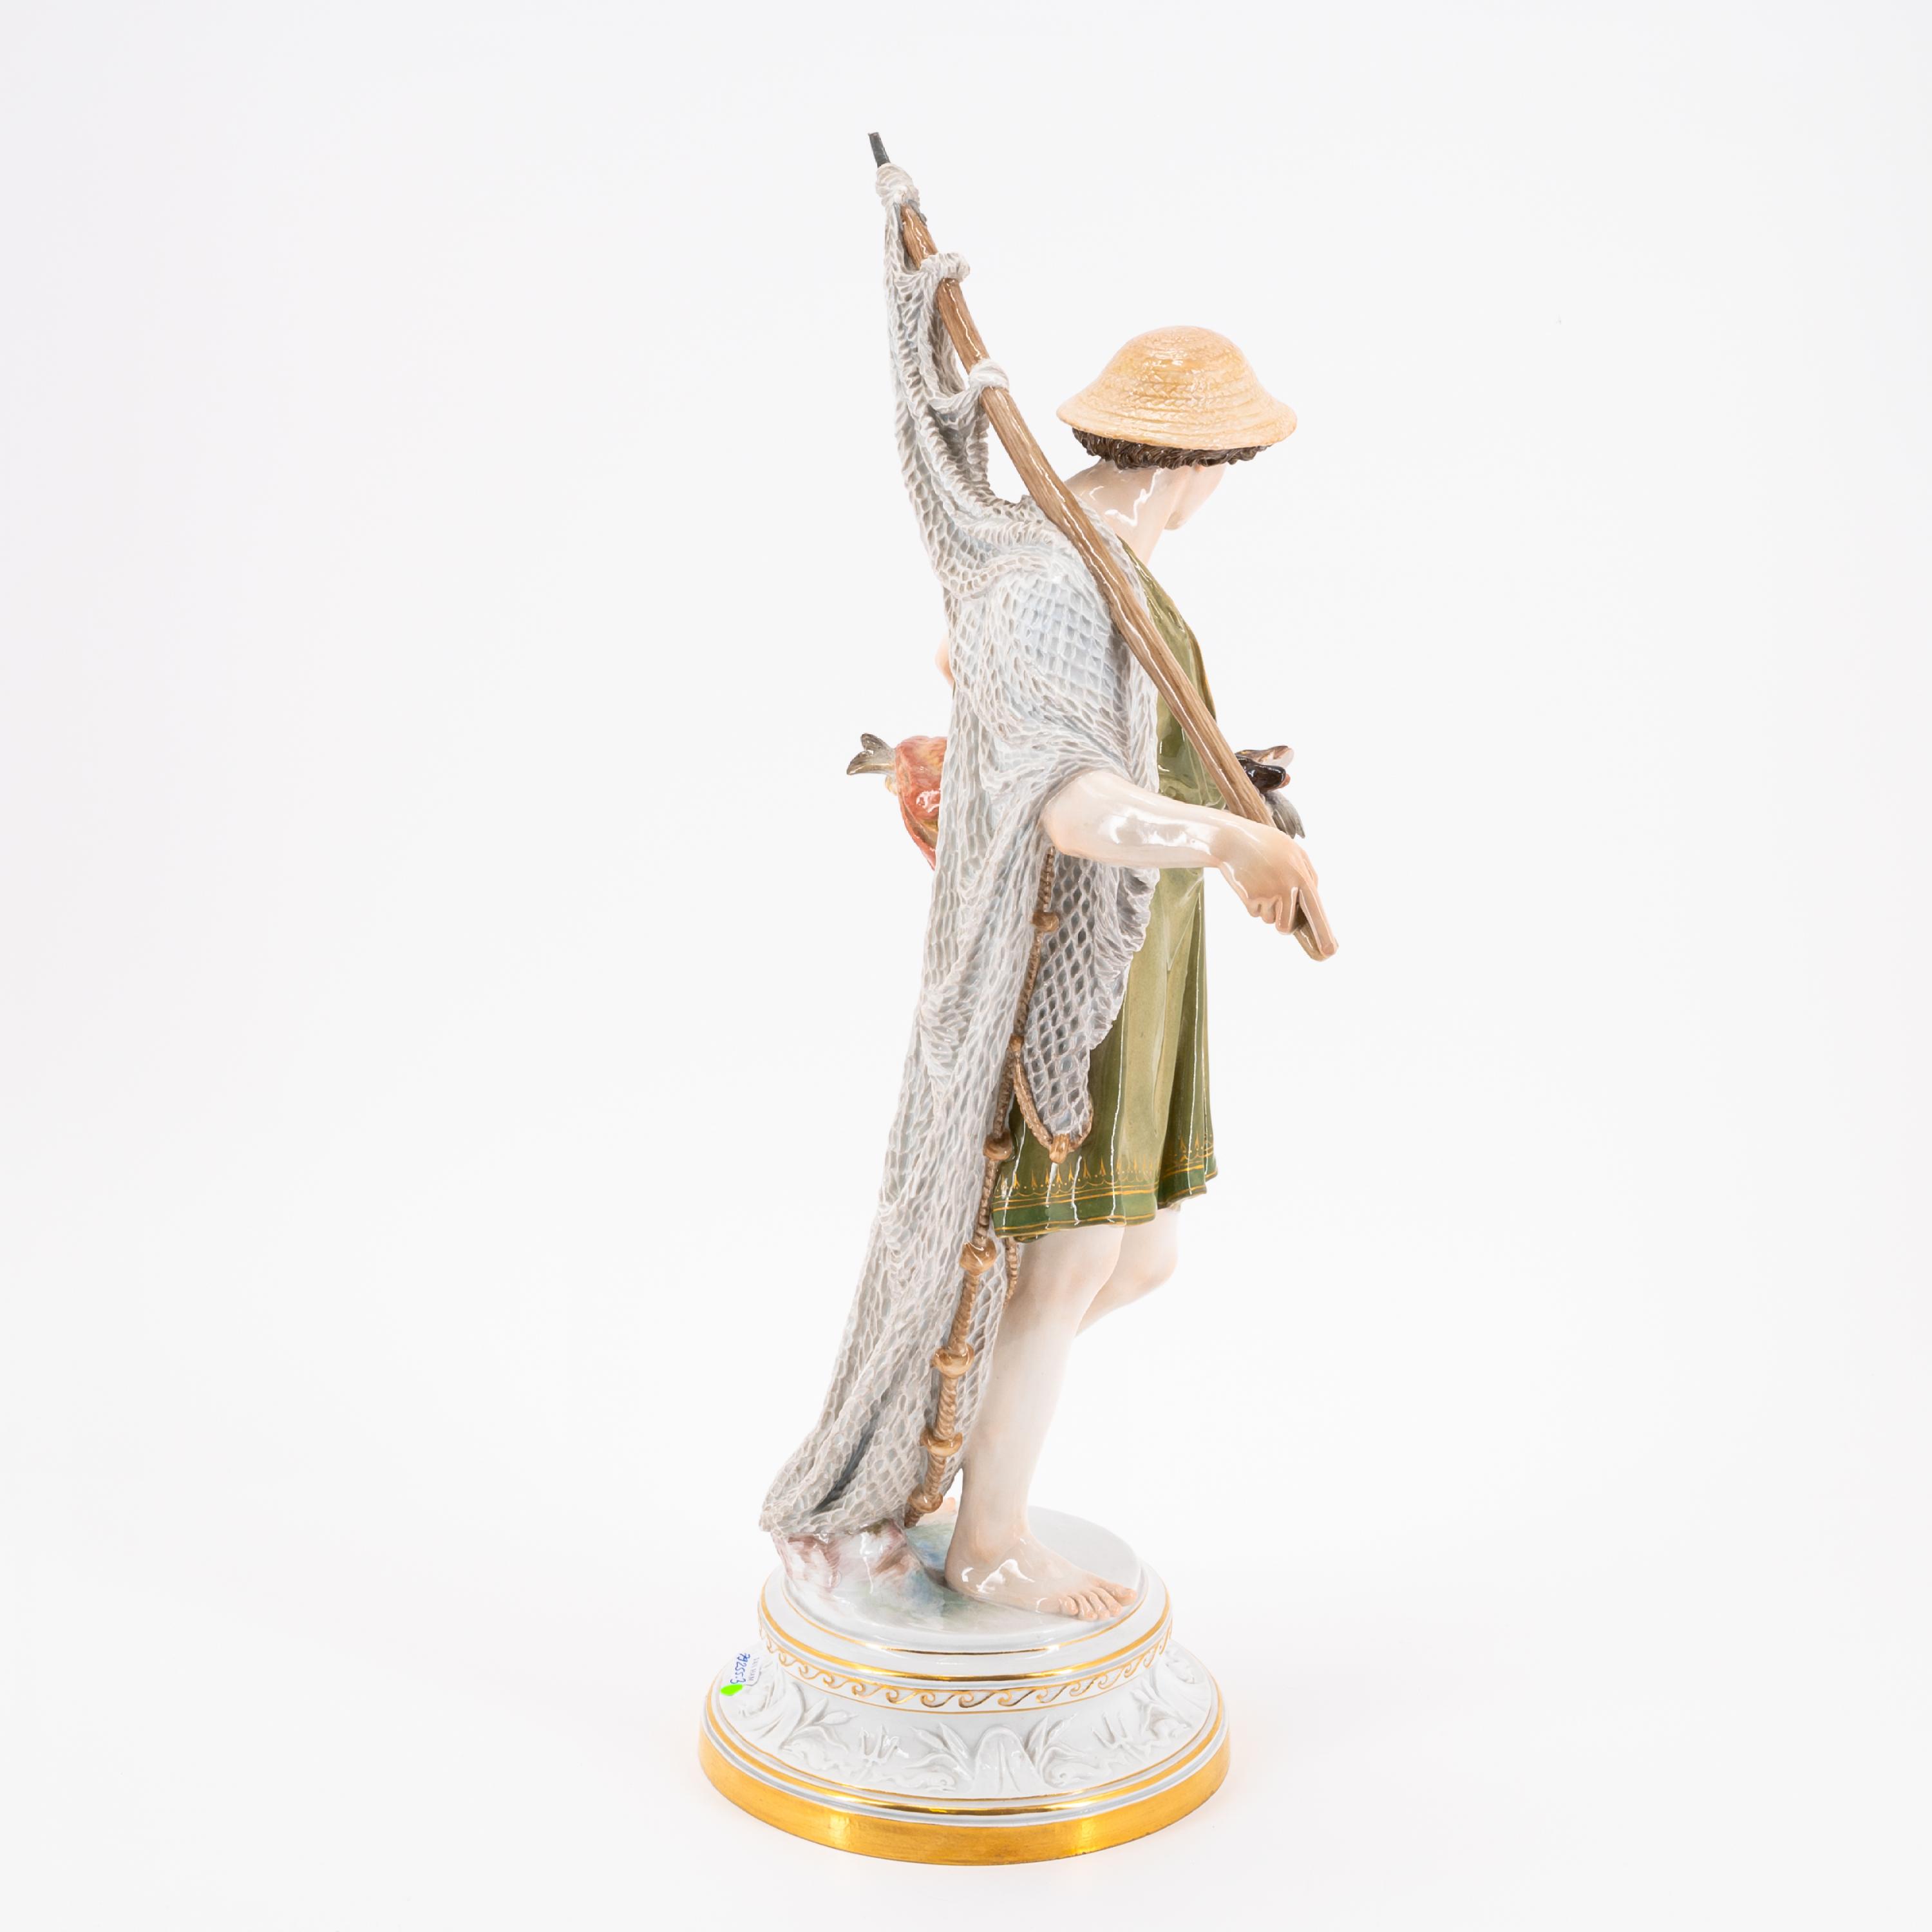 LARGE PORCELAIN FIGURINE OF A FISHER - Image 5 of 6